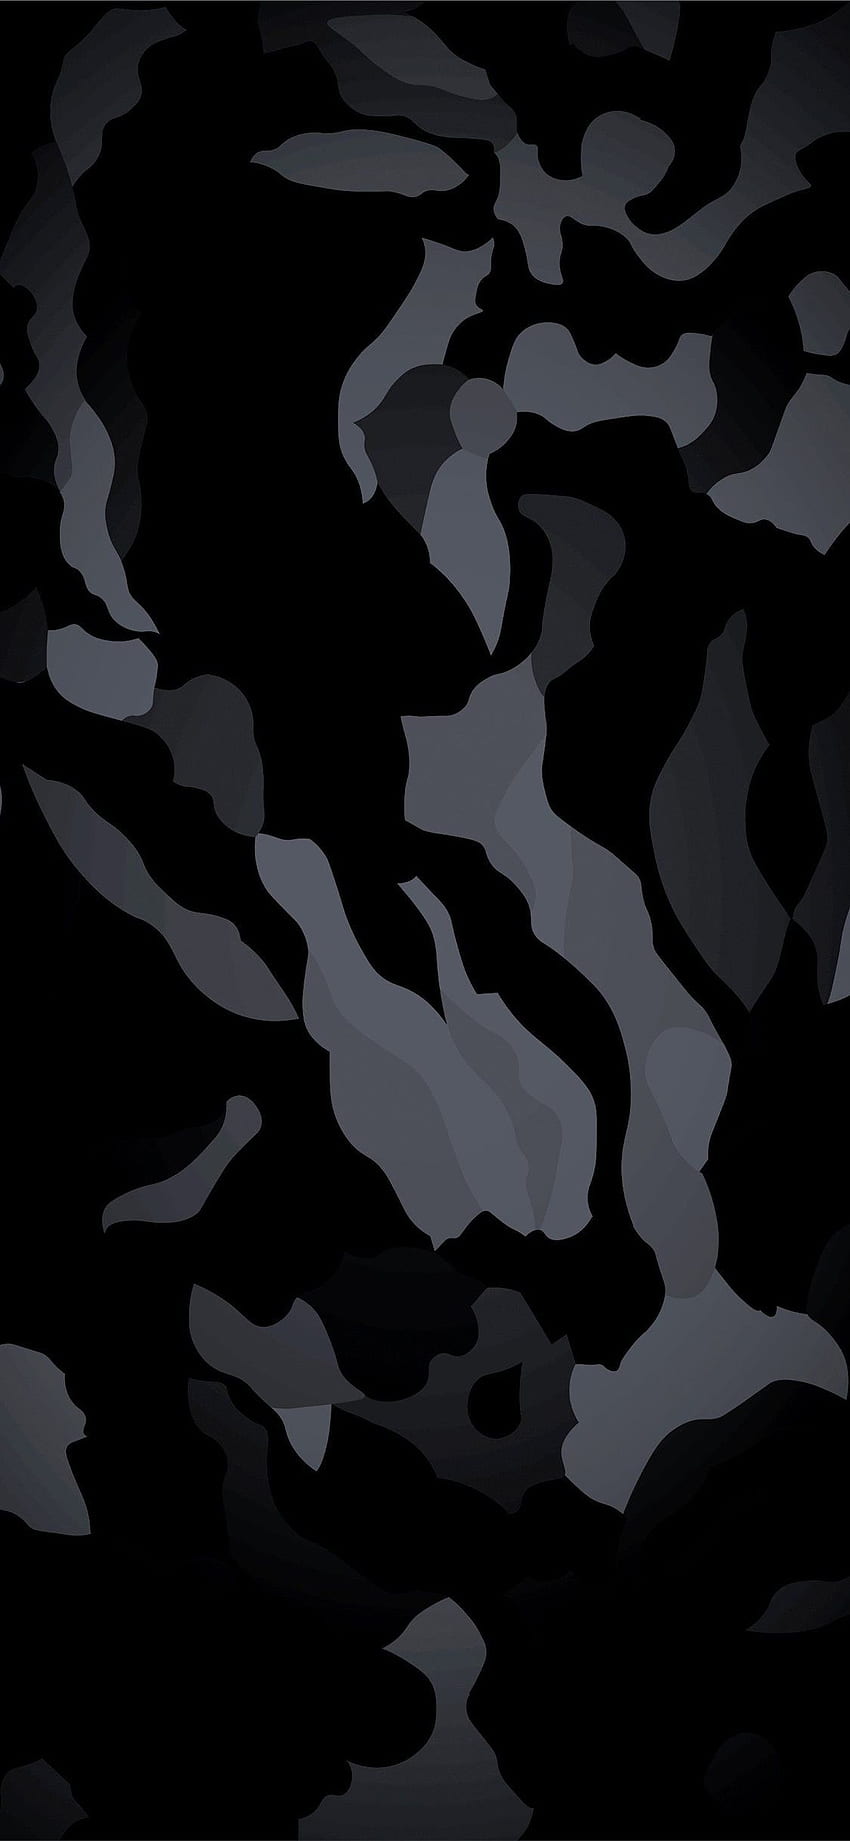 Black Pattern Military camouflage Camouflage Desig. HD phone wallpaper